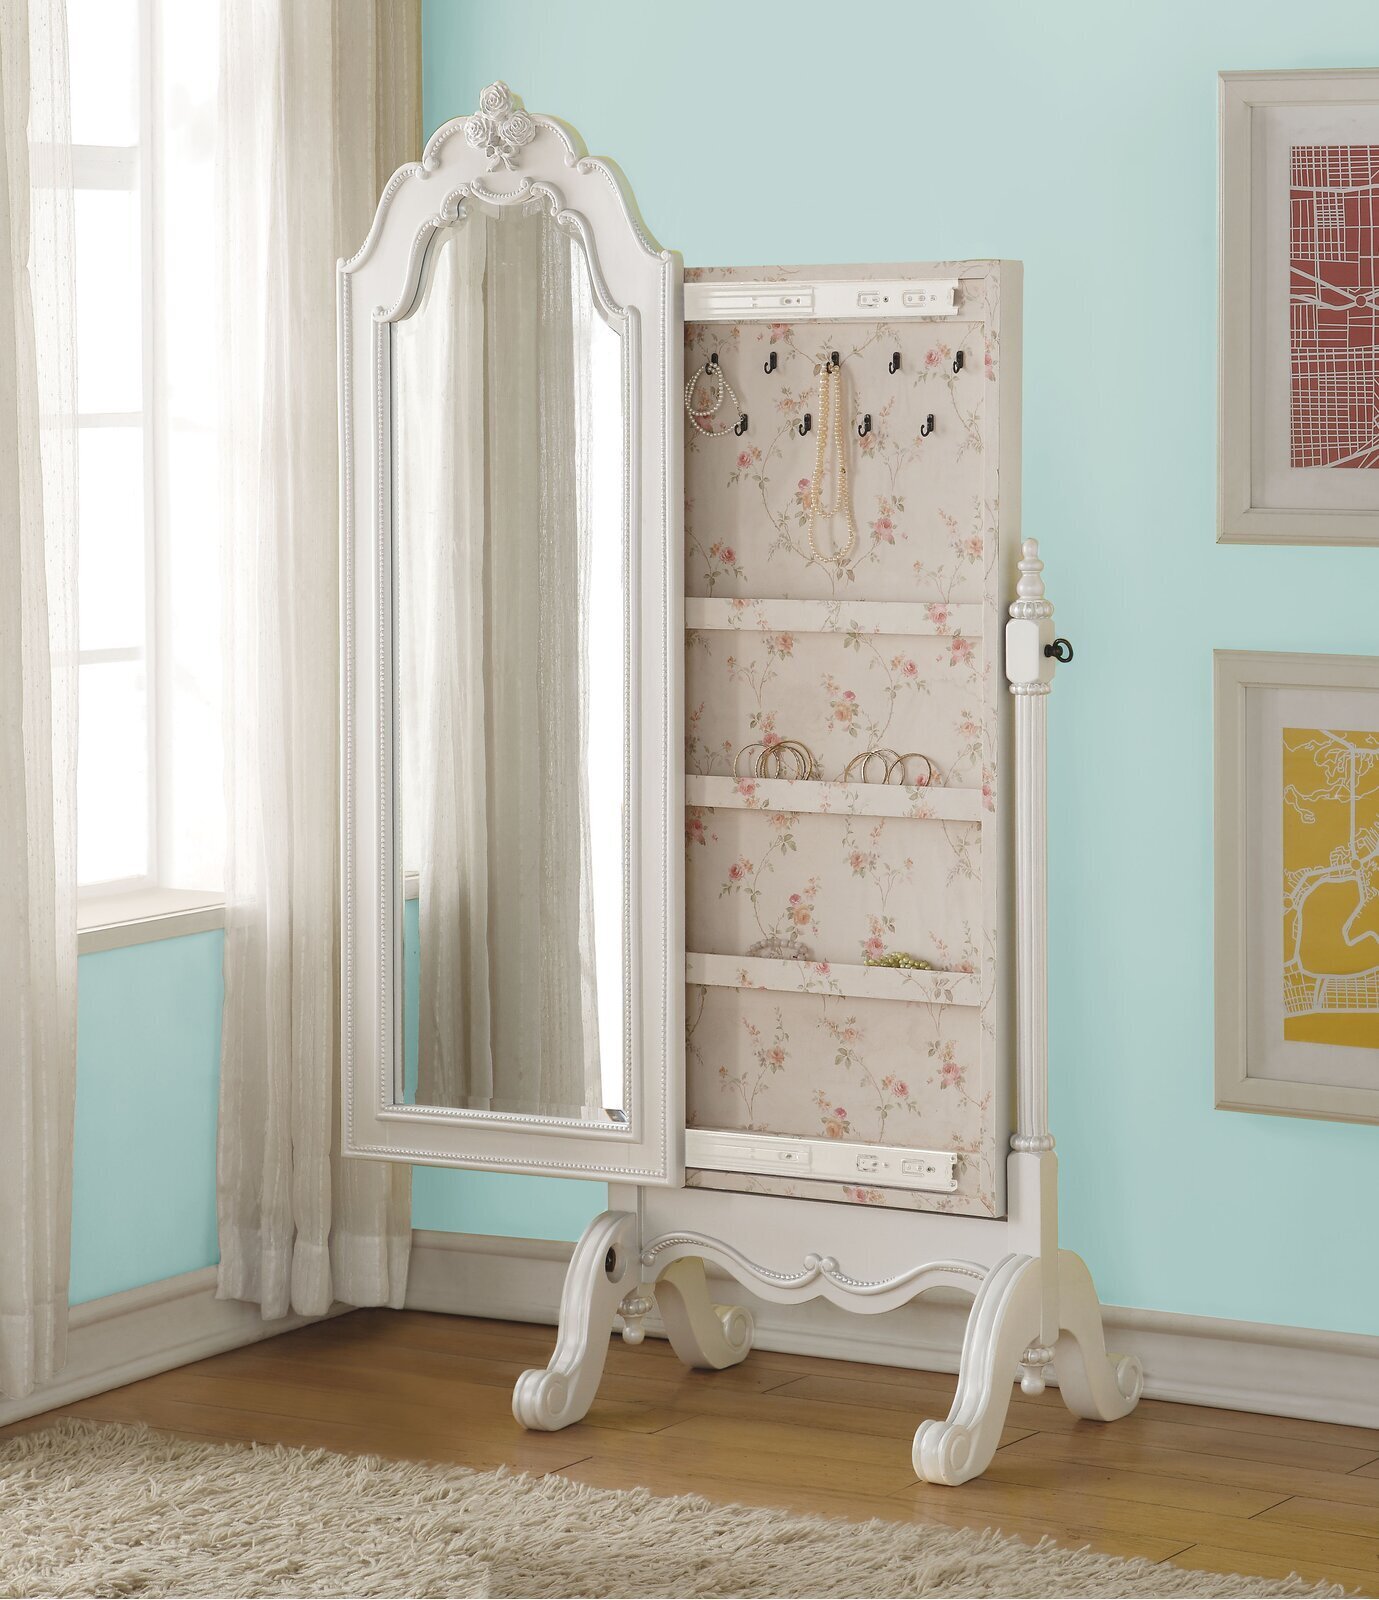 Fairytale Antique Jewelry Armoire with Mirror 